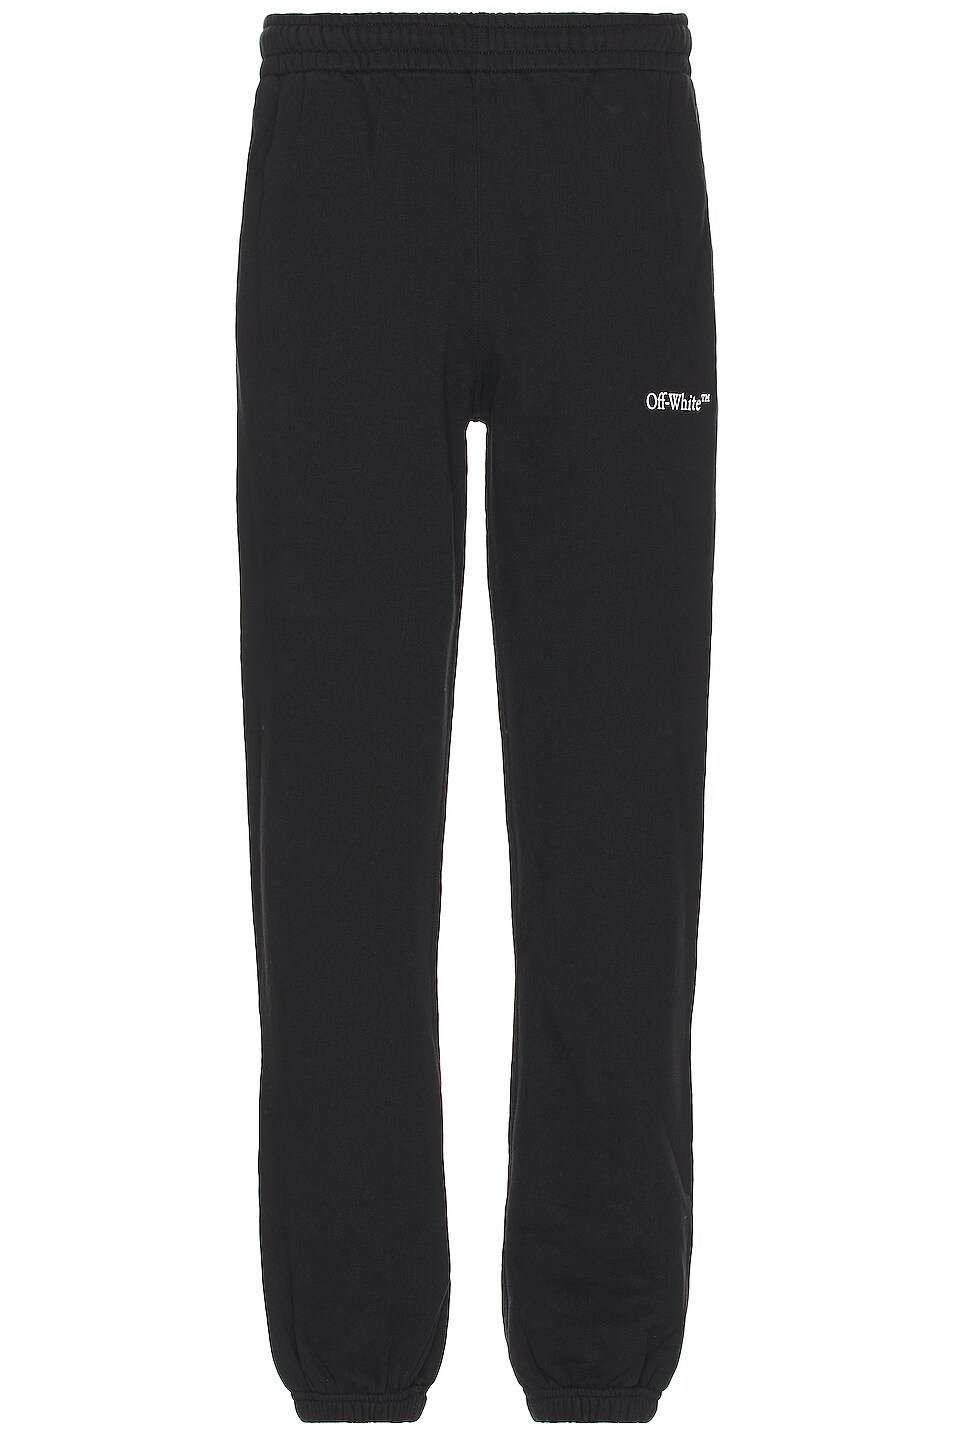 Image 1 of OFF-WHITE Caravag Paint Sweatpants in Black & White